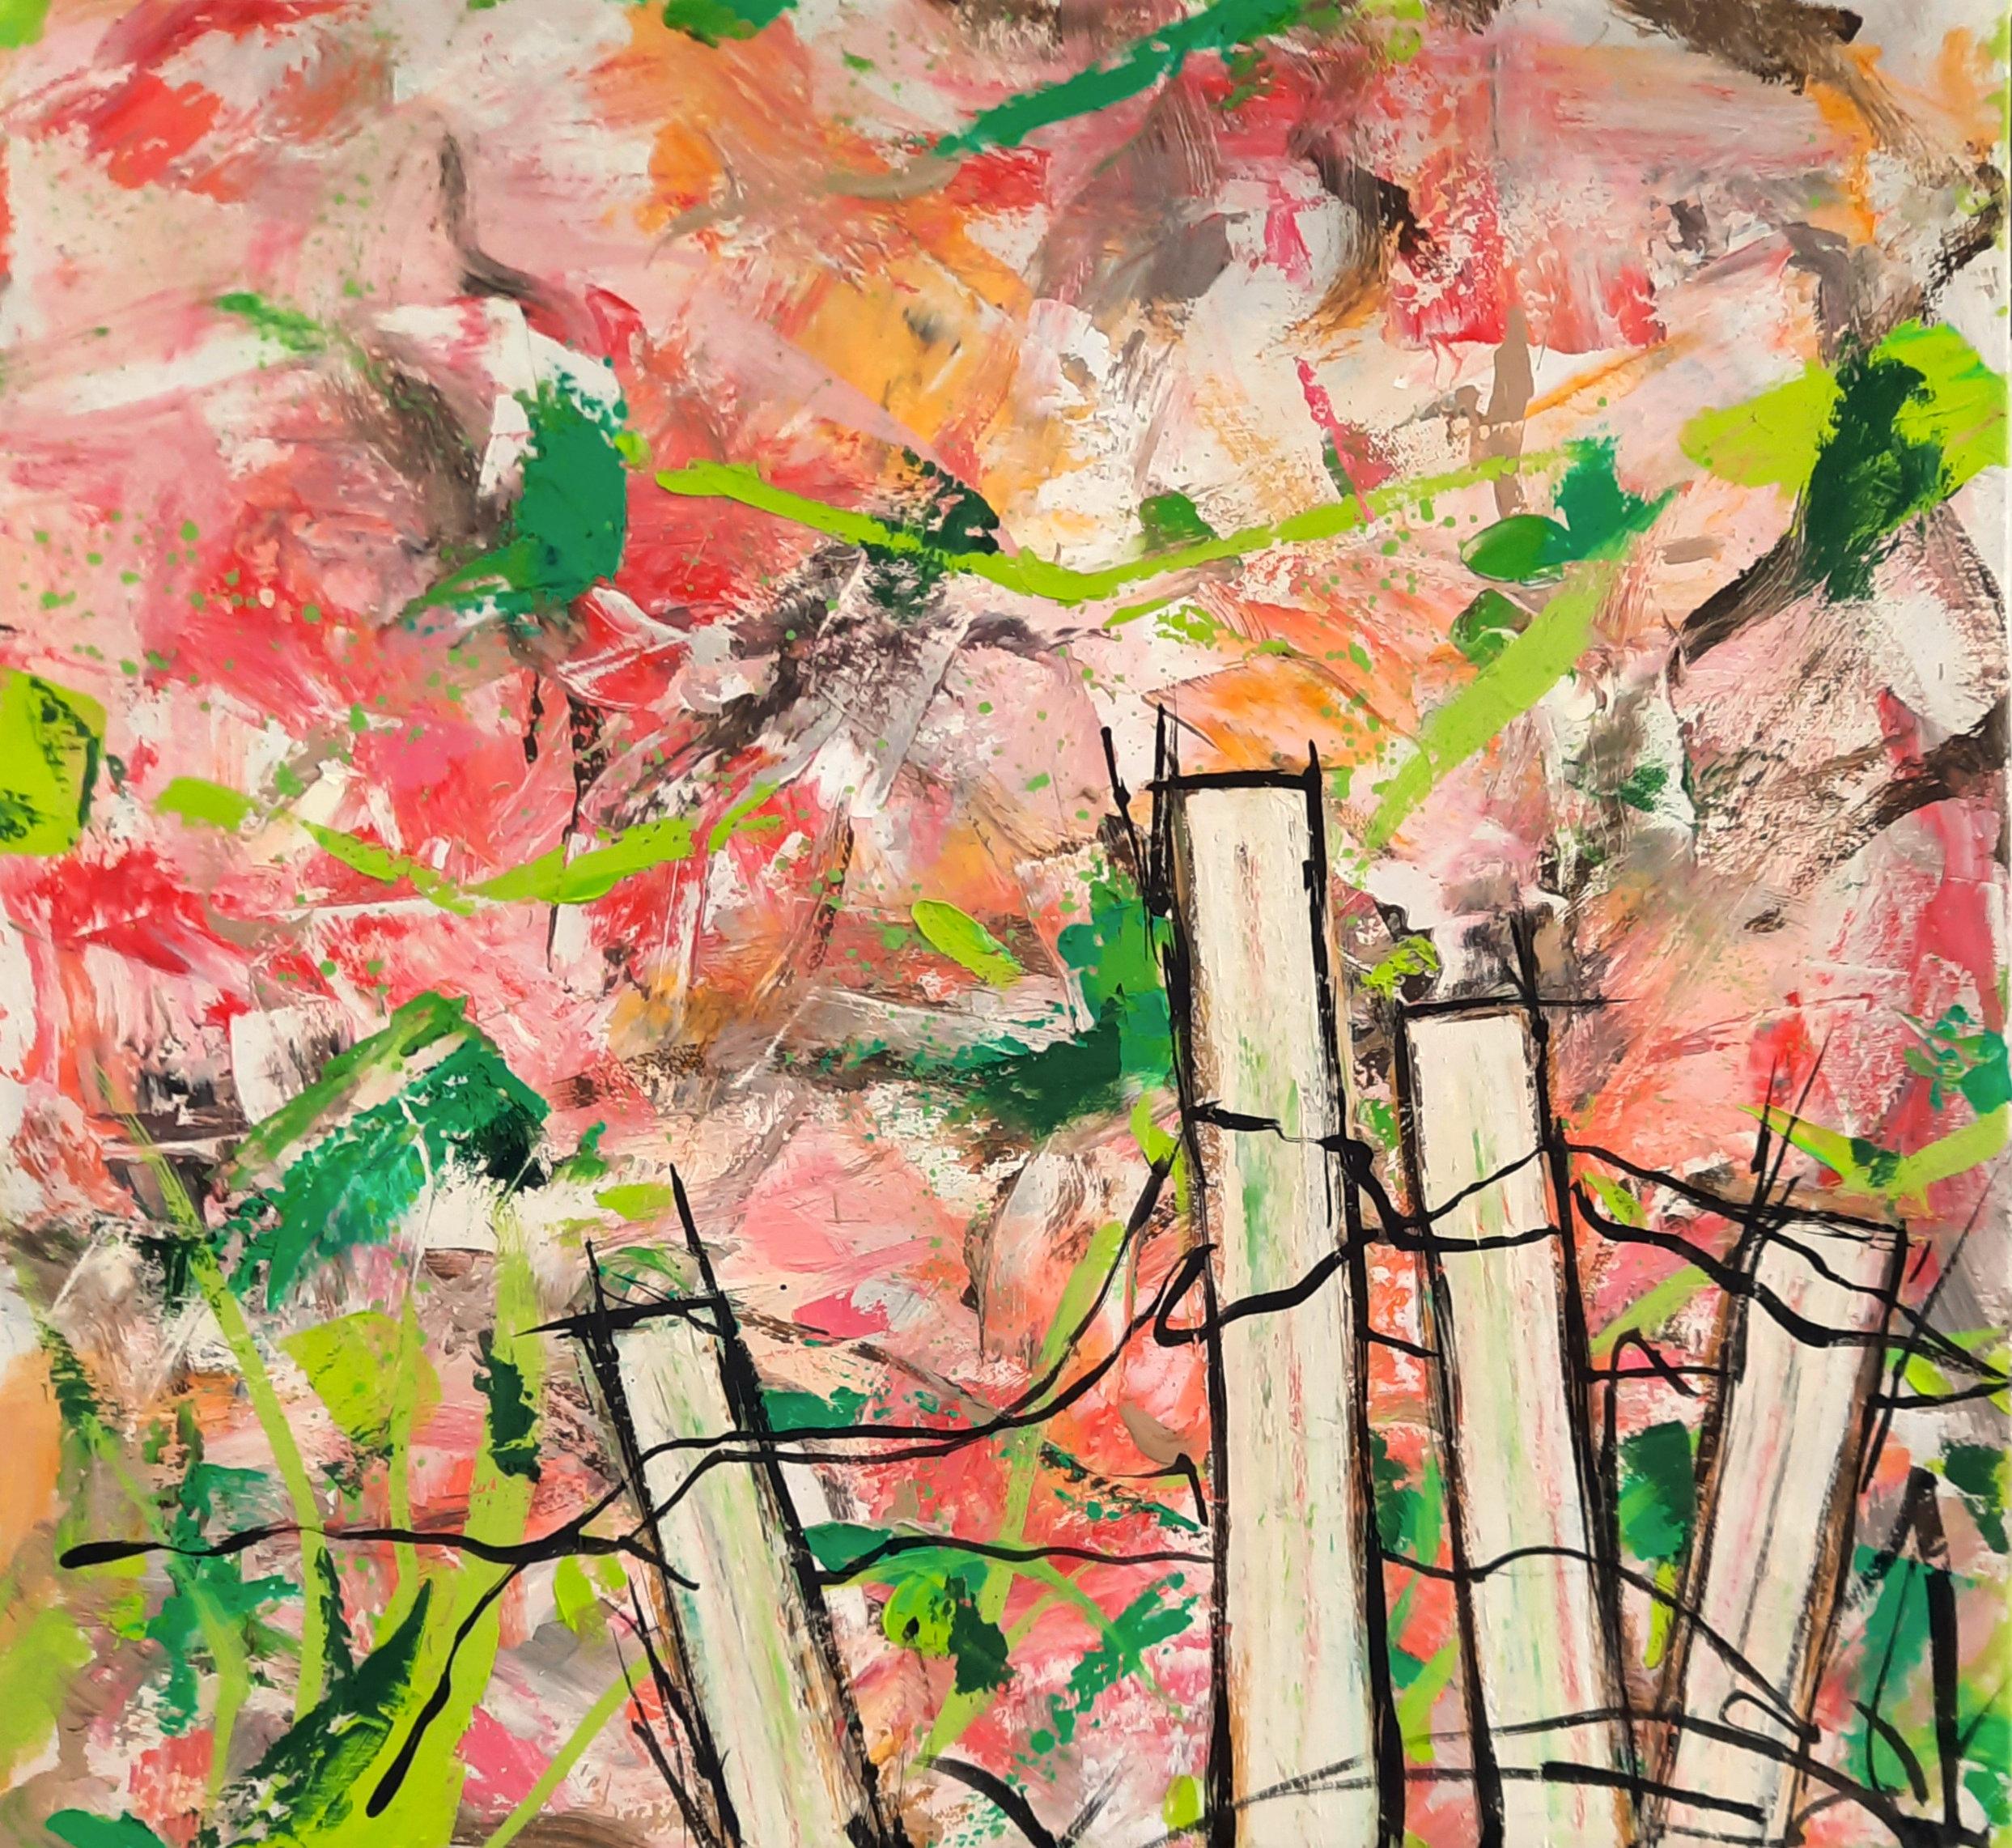 Anita Loomis Abstract Painting - "A Garden View 2", abstract, garden, fence, pinks, greens, impasto, oil painting